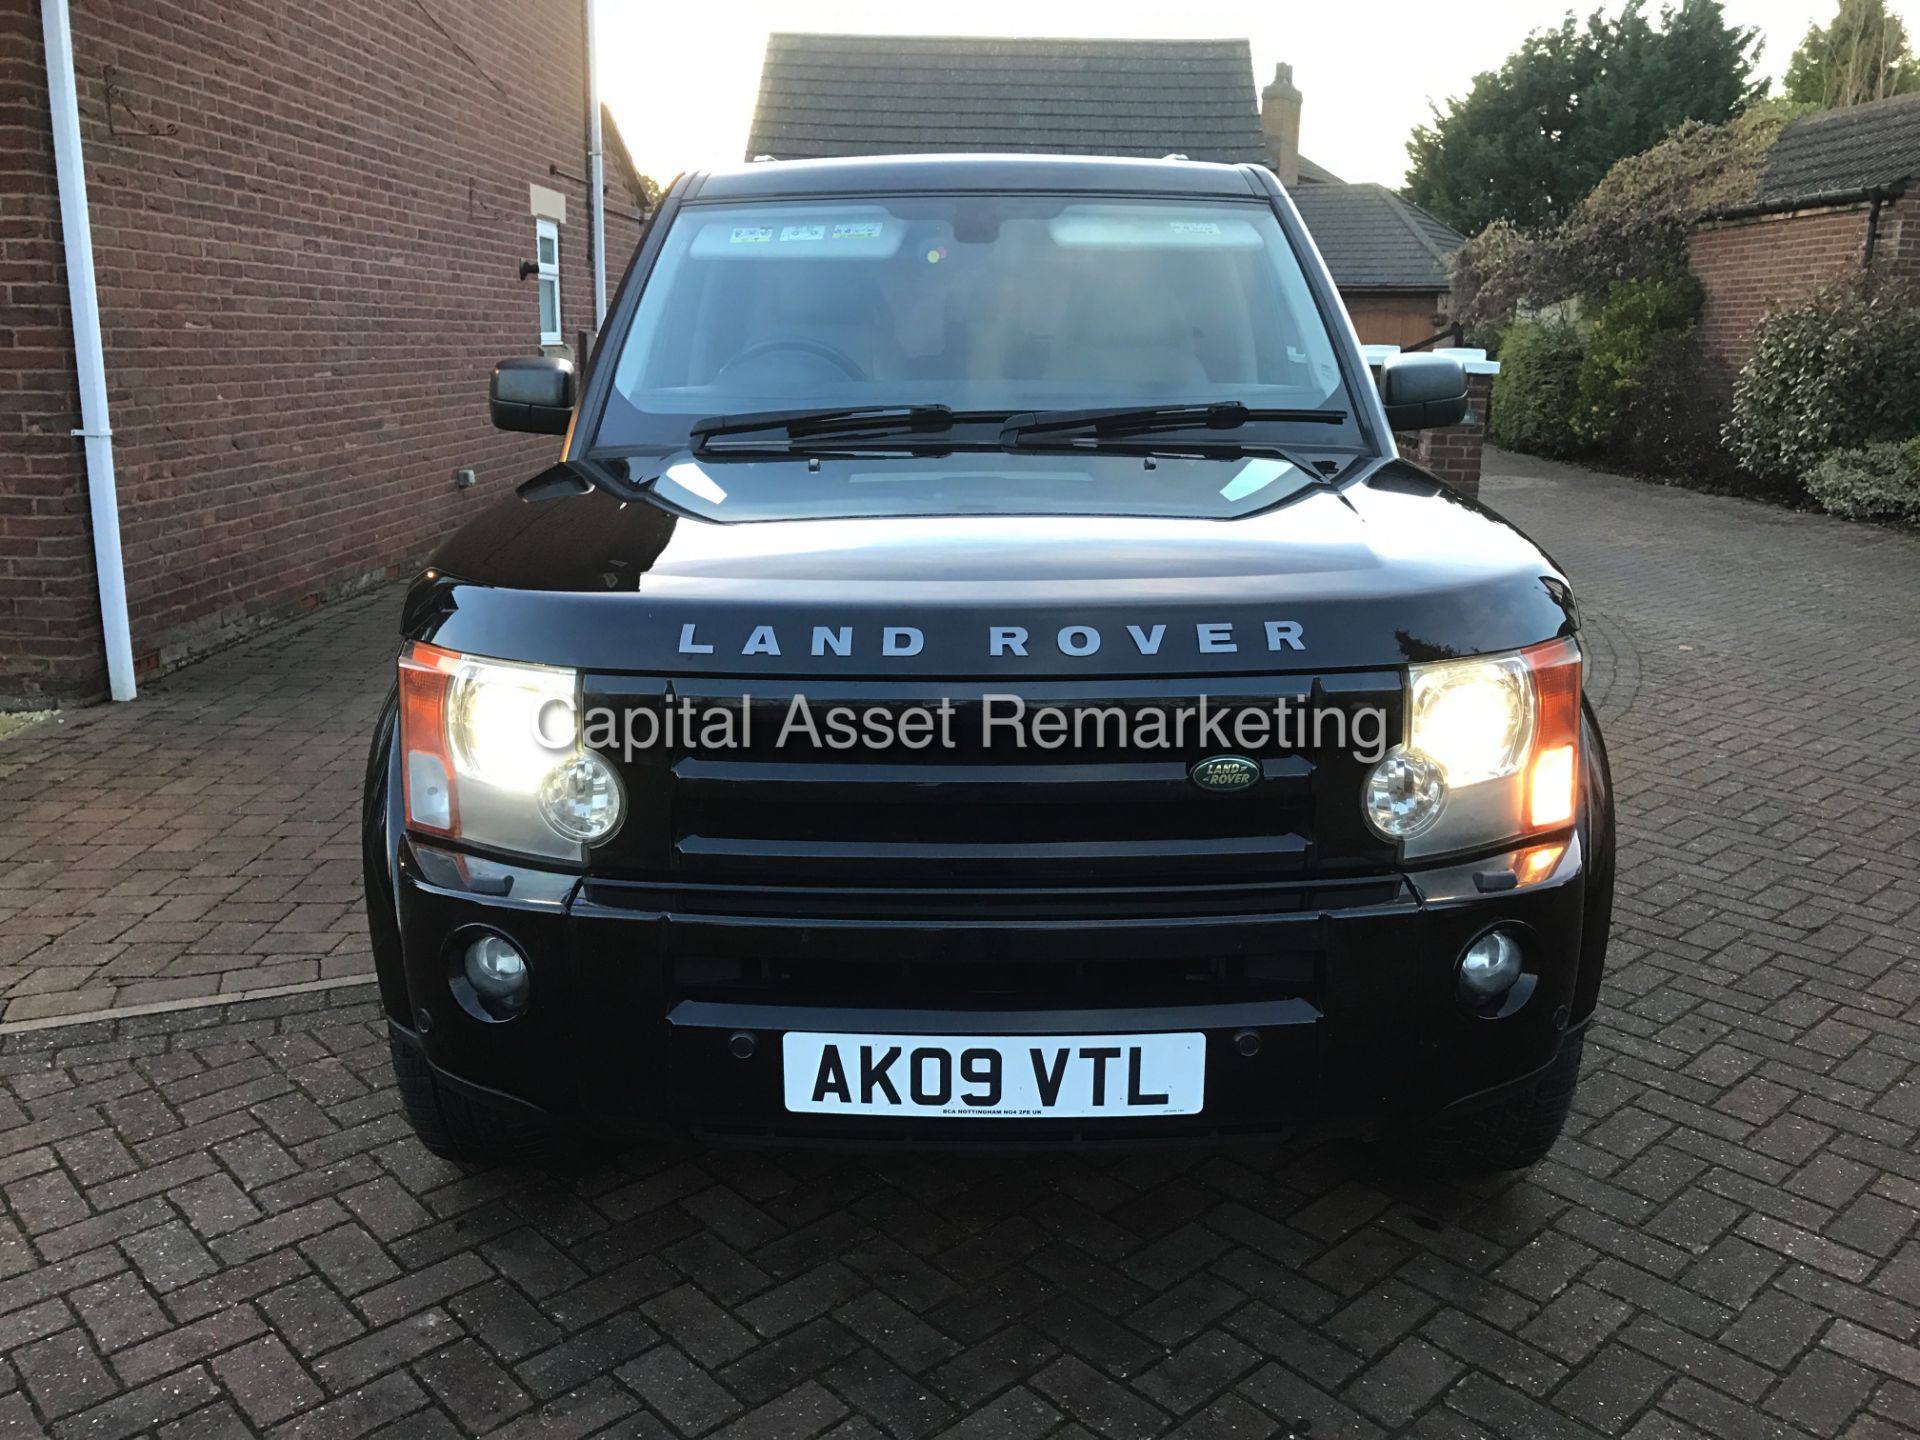 LANDROVER DISCOVERY 3 "TDV6" AUTO - (BLACK EDITION) - 09 REG - SAT NAV - LEATHER - 7 SEATER - WOW!! - Image 2 of 30